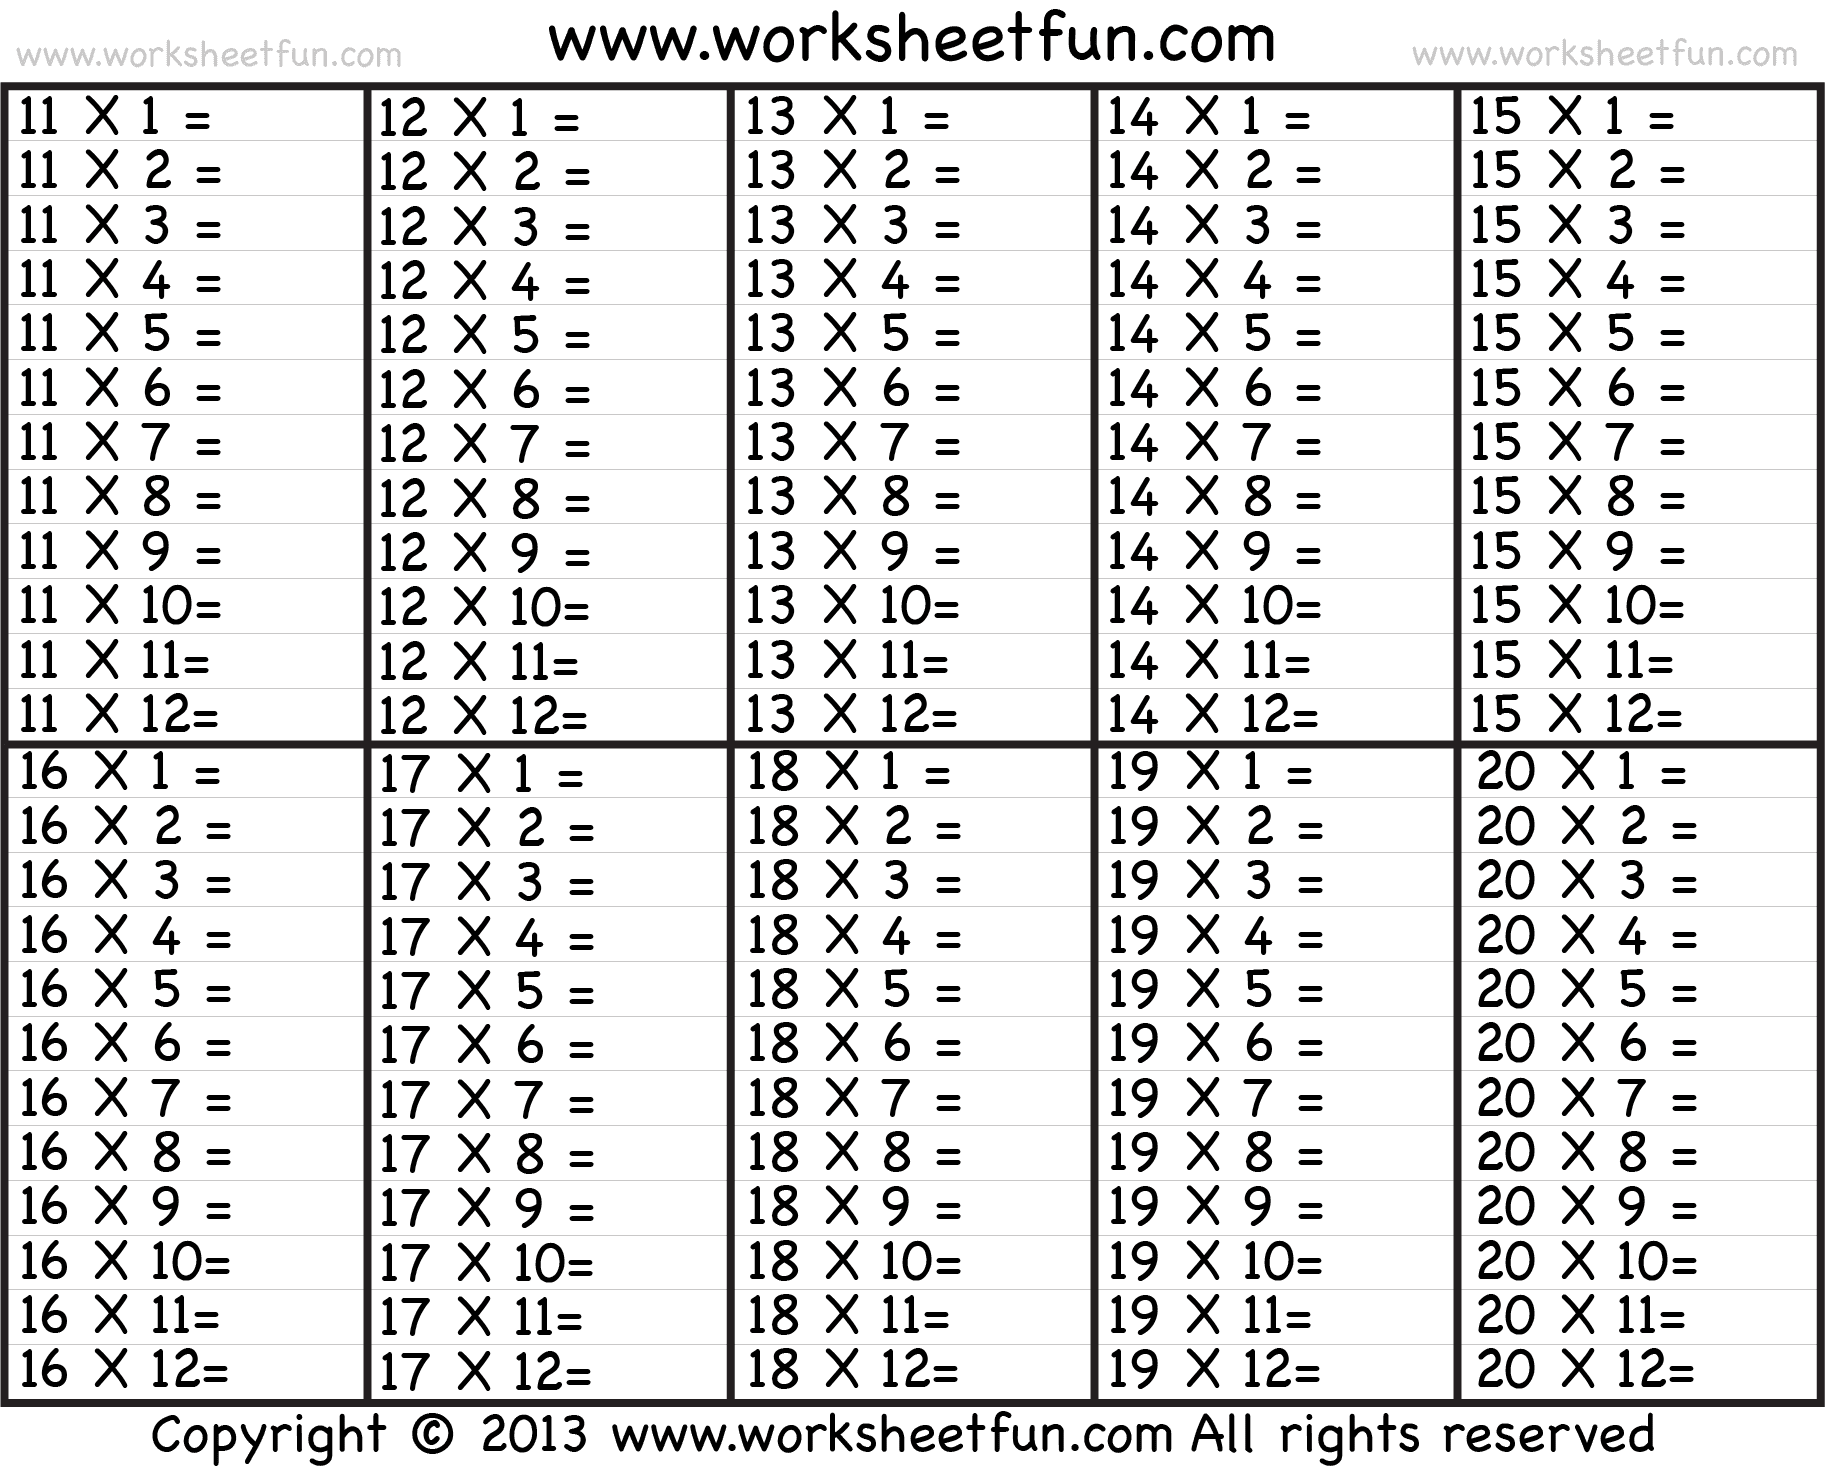 fitfab-division-times-tables-1-12